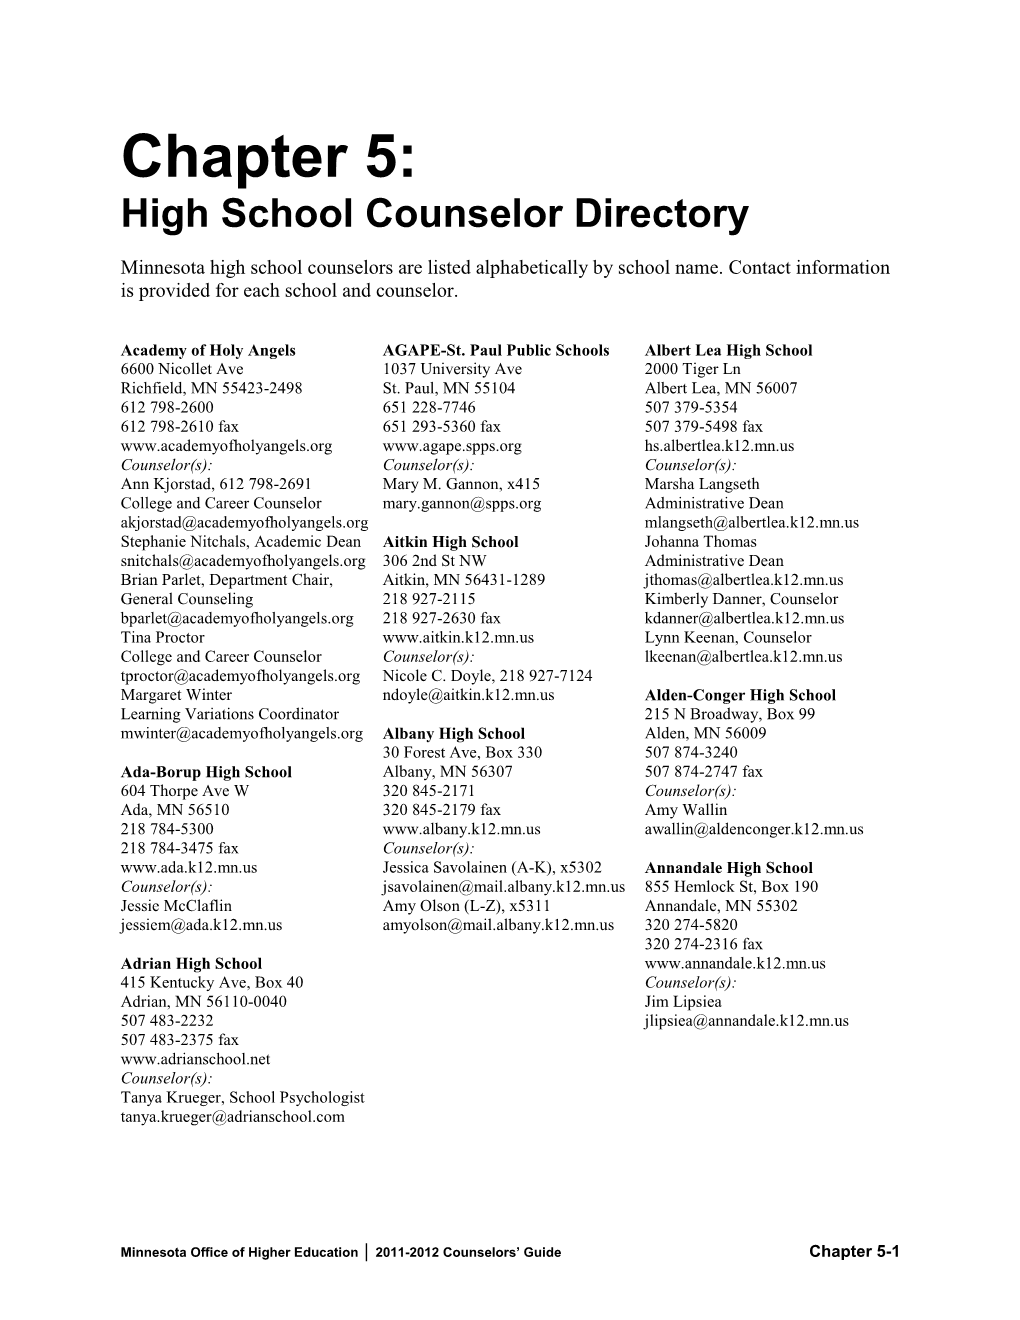 Chapter 5: High School Counselor Directory